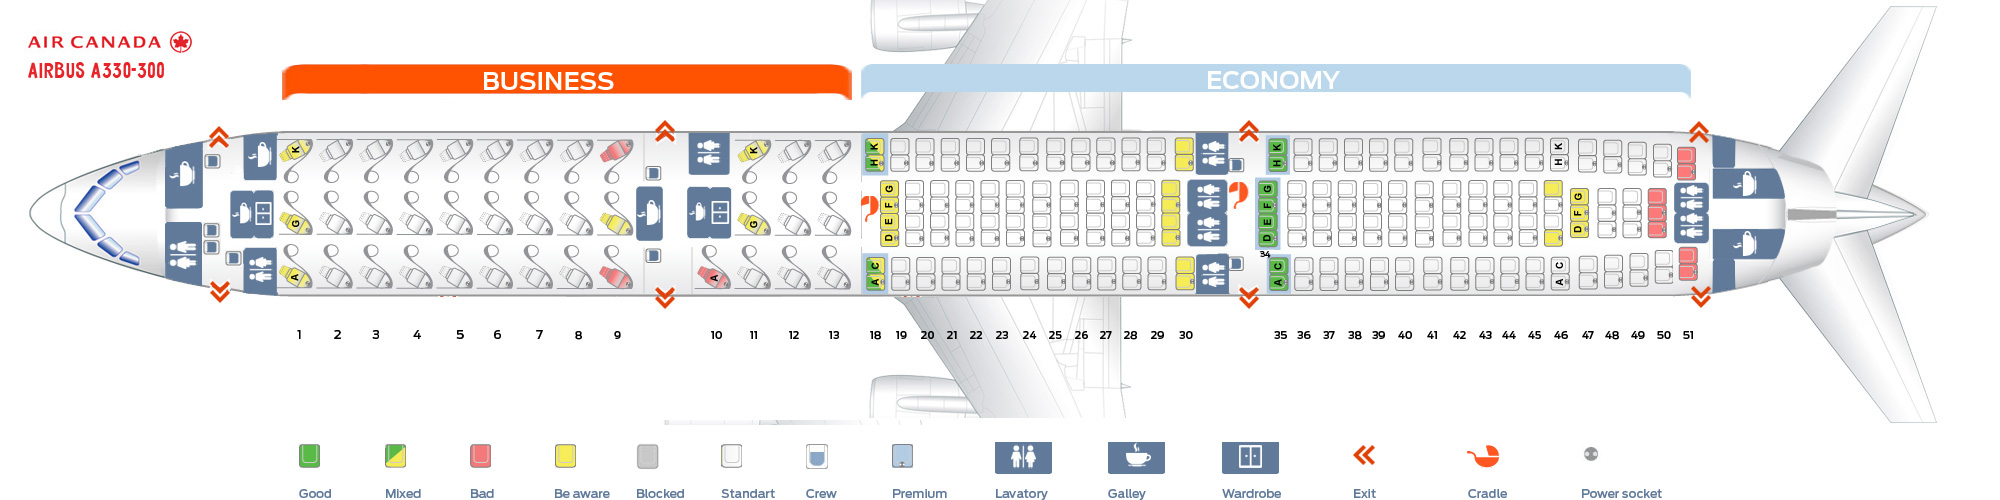 Seat Map and Seating Chart Airbus A330 300 Air Canada Version 1